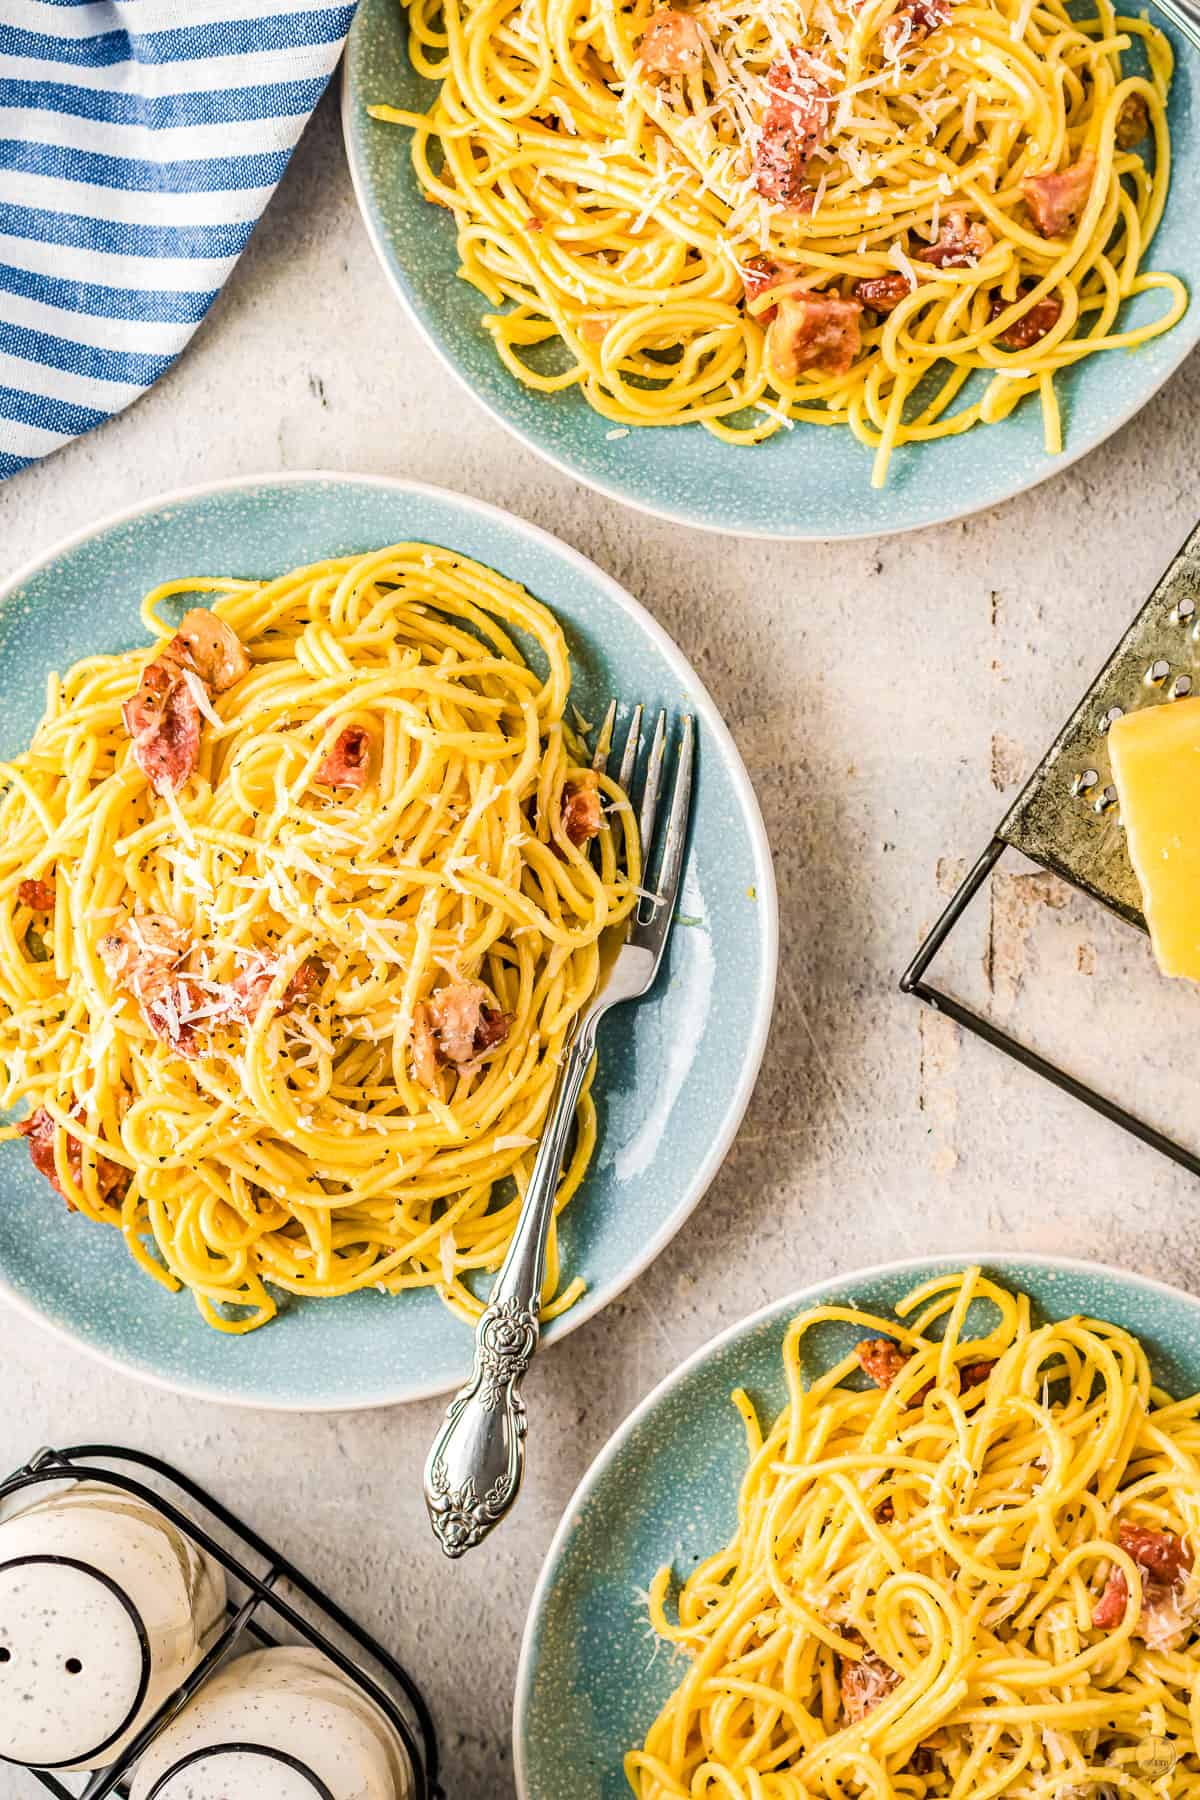 Spaghetti Carbonara on a blue plate . There are two other blue plates of spaghetti carbonara in the background, and it is all sitting on a table.